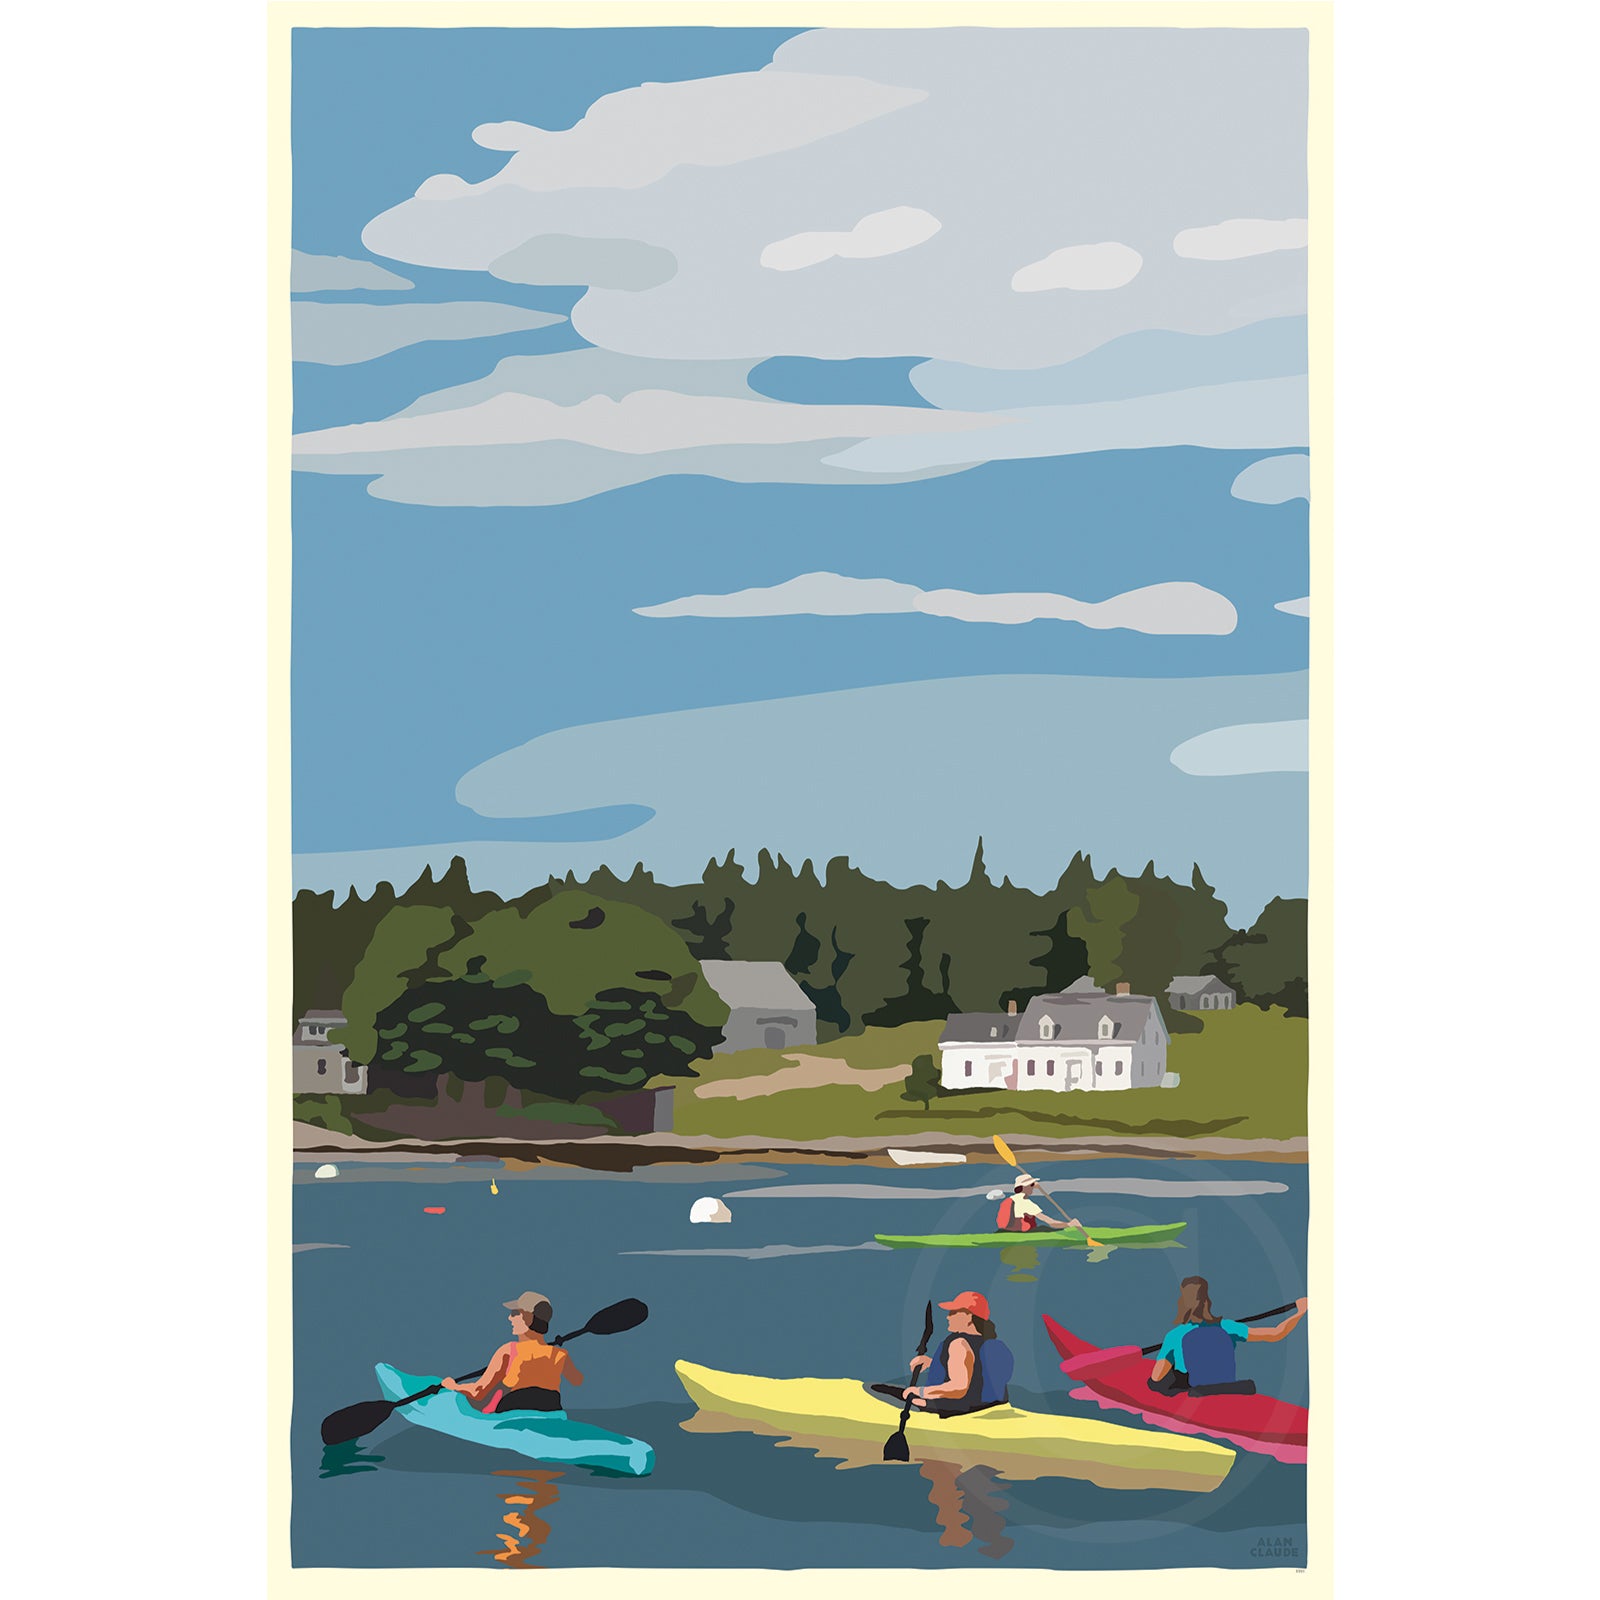 Kayaking in Port Clyde Art Print 36" x 53" Wall Poster By Alan Claude - Maine